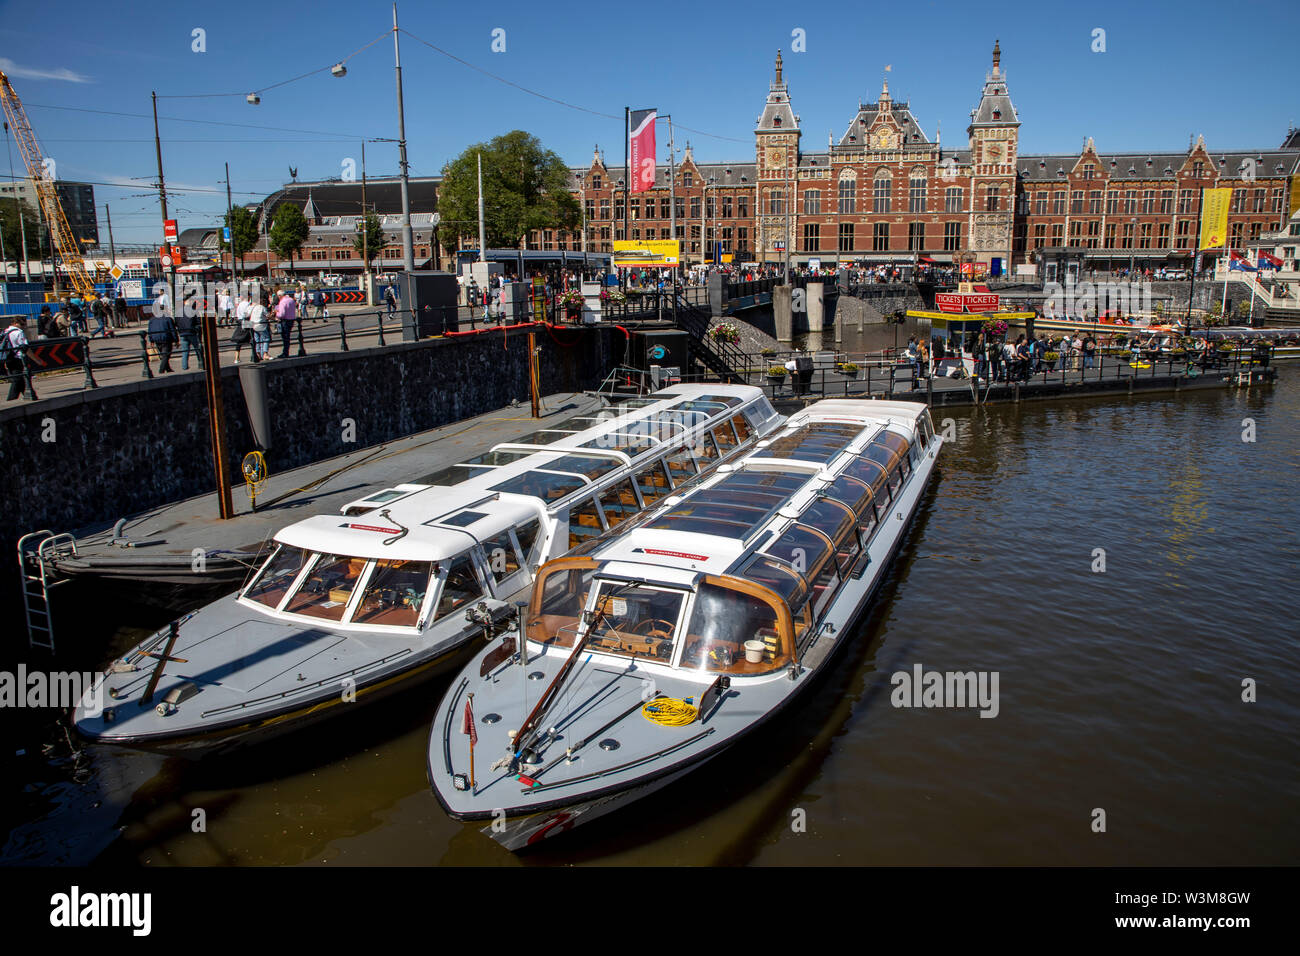 Amsterdam, Netherlands, city centre, old town, mooring for canal boats, round trip boats at the main station, Amsterdam Centraal, Stock Photo